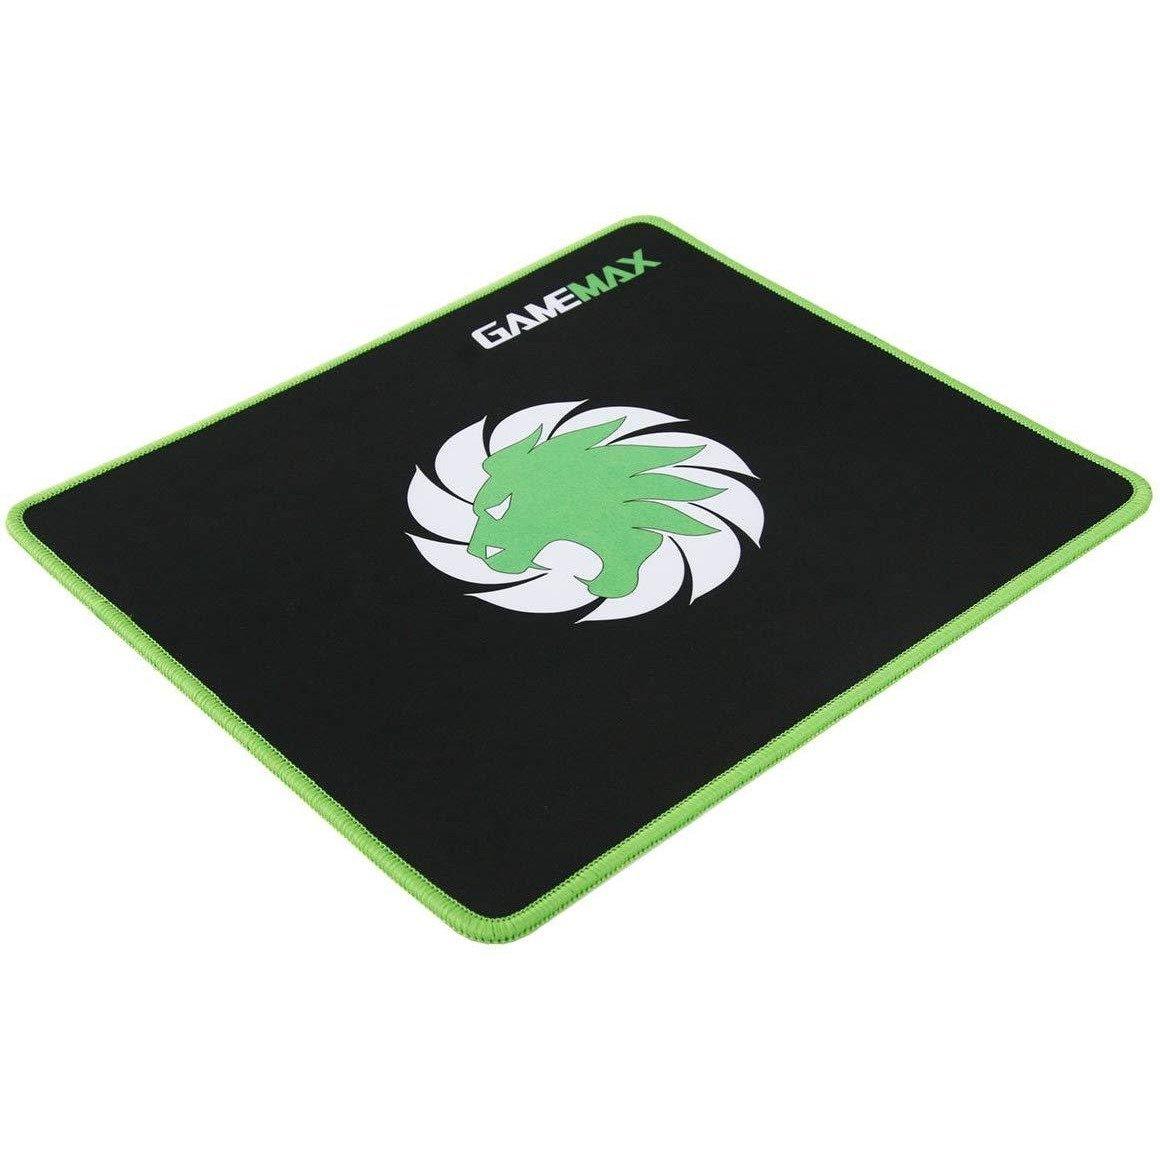 Game Max GMX-MPADSML Small Gaming Mouse Pad - Smartmarket.ma